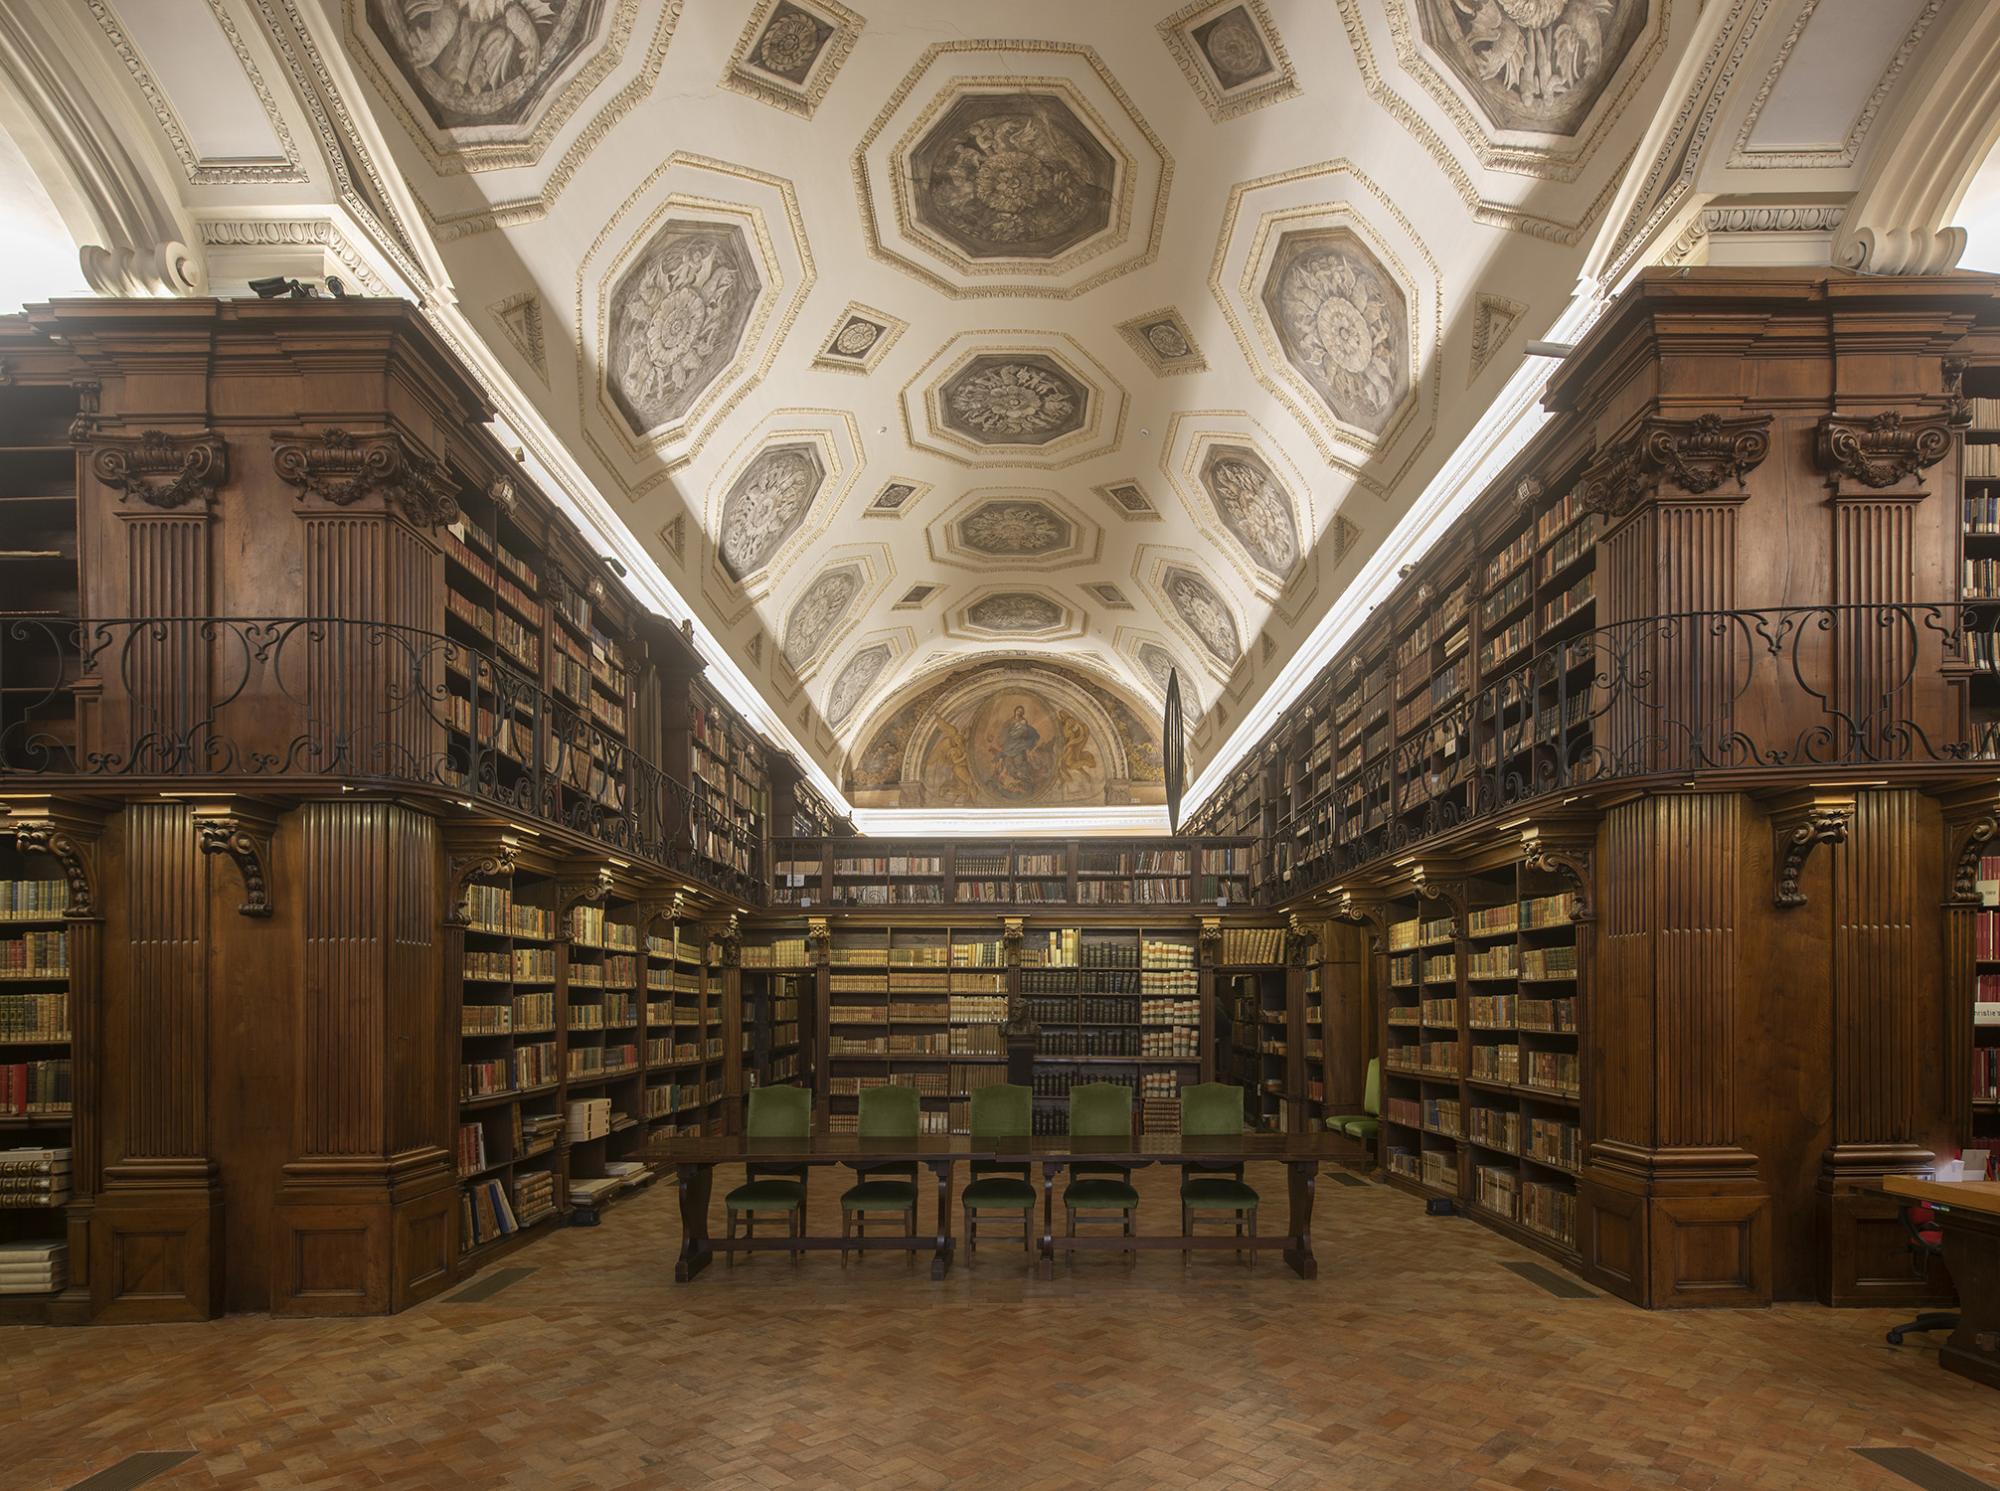 The ‘Crociera’ and the Reading Room in the Roman College building